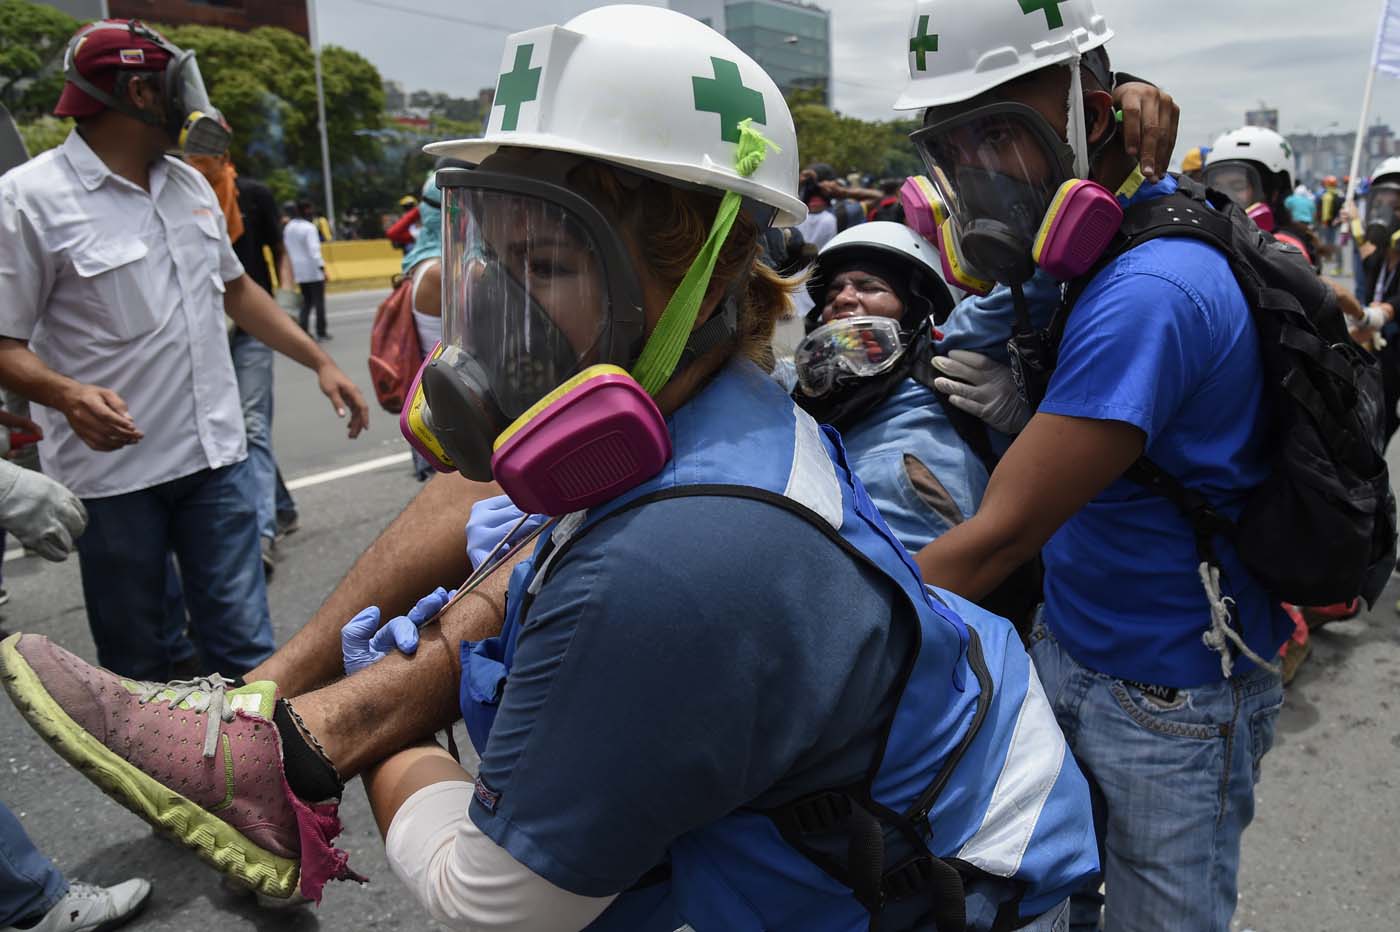 A demonstrator is attended by medical staff during a protest against Venezuelan President Nicolas Maduro, in Caracas on May 3, 2017. Venezuela's angry opposition rallied Wednesday vowing huge street protests against President Nicolas Maduro's plan to rewrite the constitution and accusing him of dodging elections to cling to power despite deadly unrest. / AFP PHOTO / JUAN BARRETO